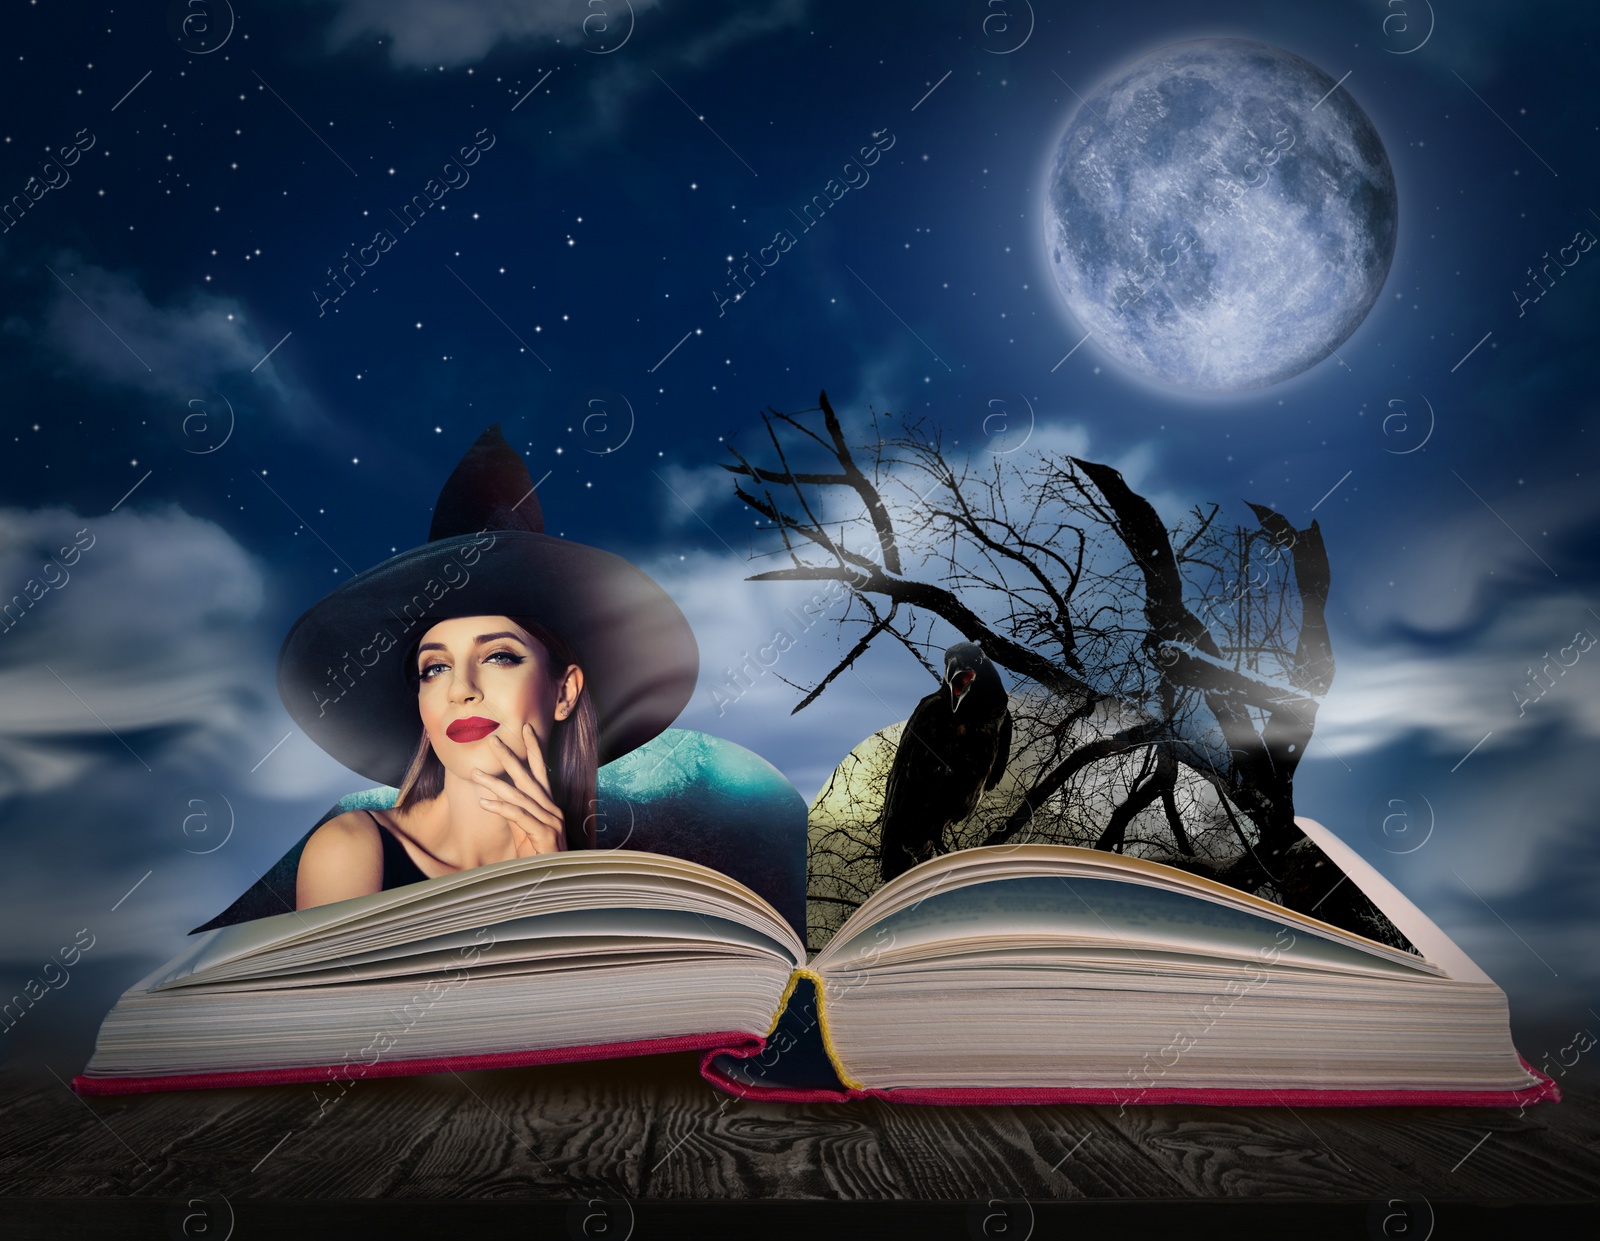 Image of Fantasy world. Open book of fairytales with witch and black crow on pages